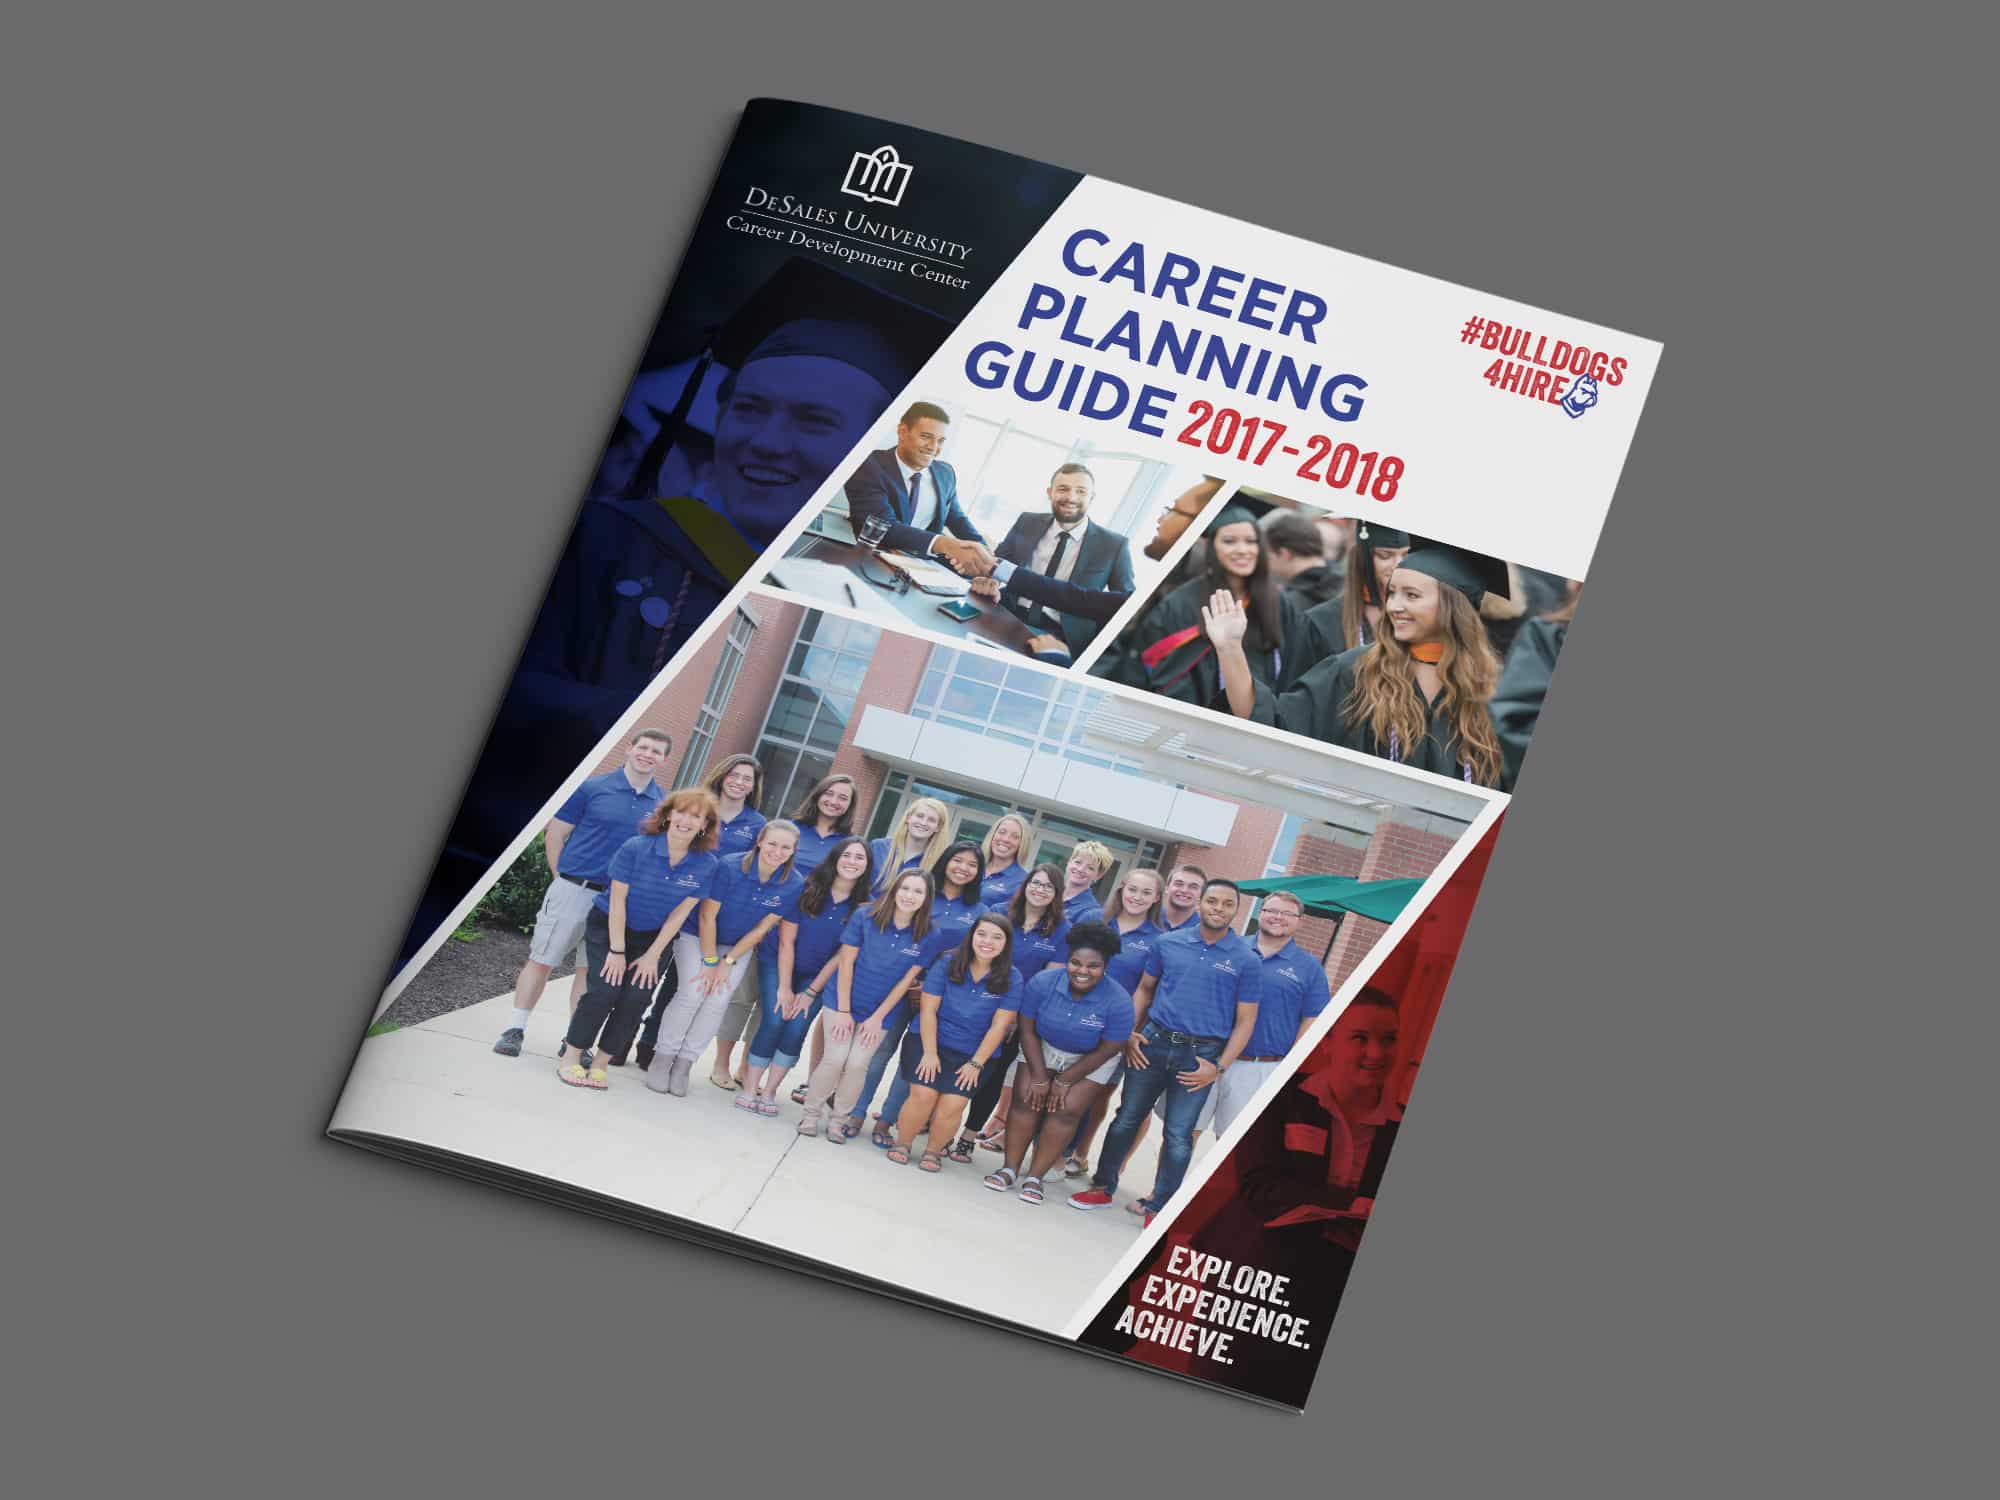 DeSales_University_Career_Planning_Guide_Cover